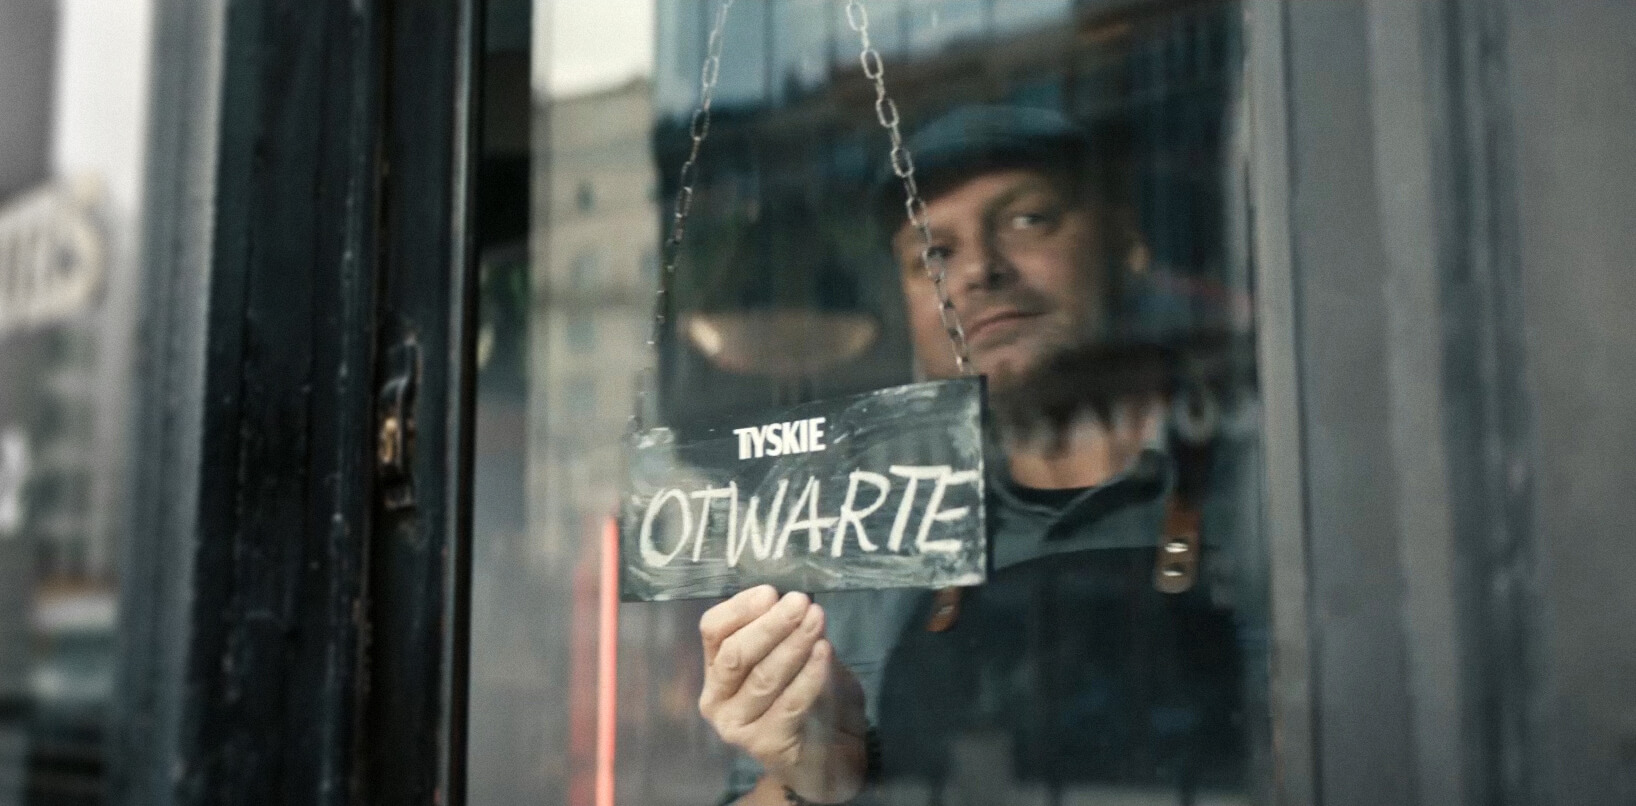 Tyskie celebrates getting on a first name basis in pubs again in a new spot